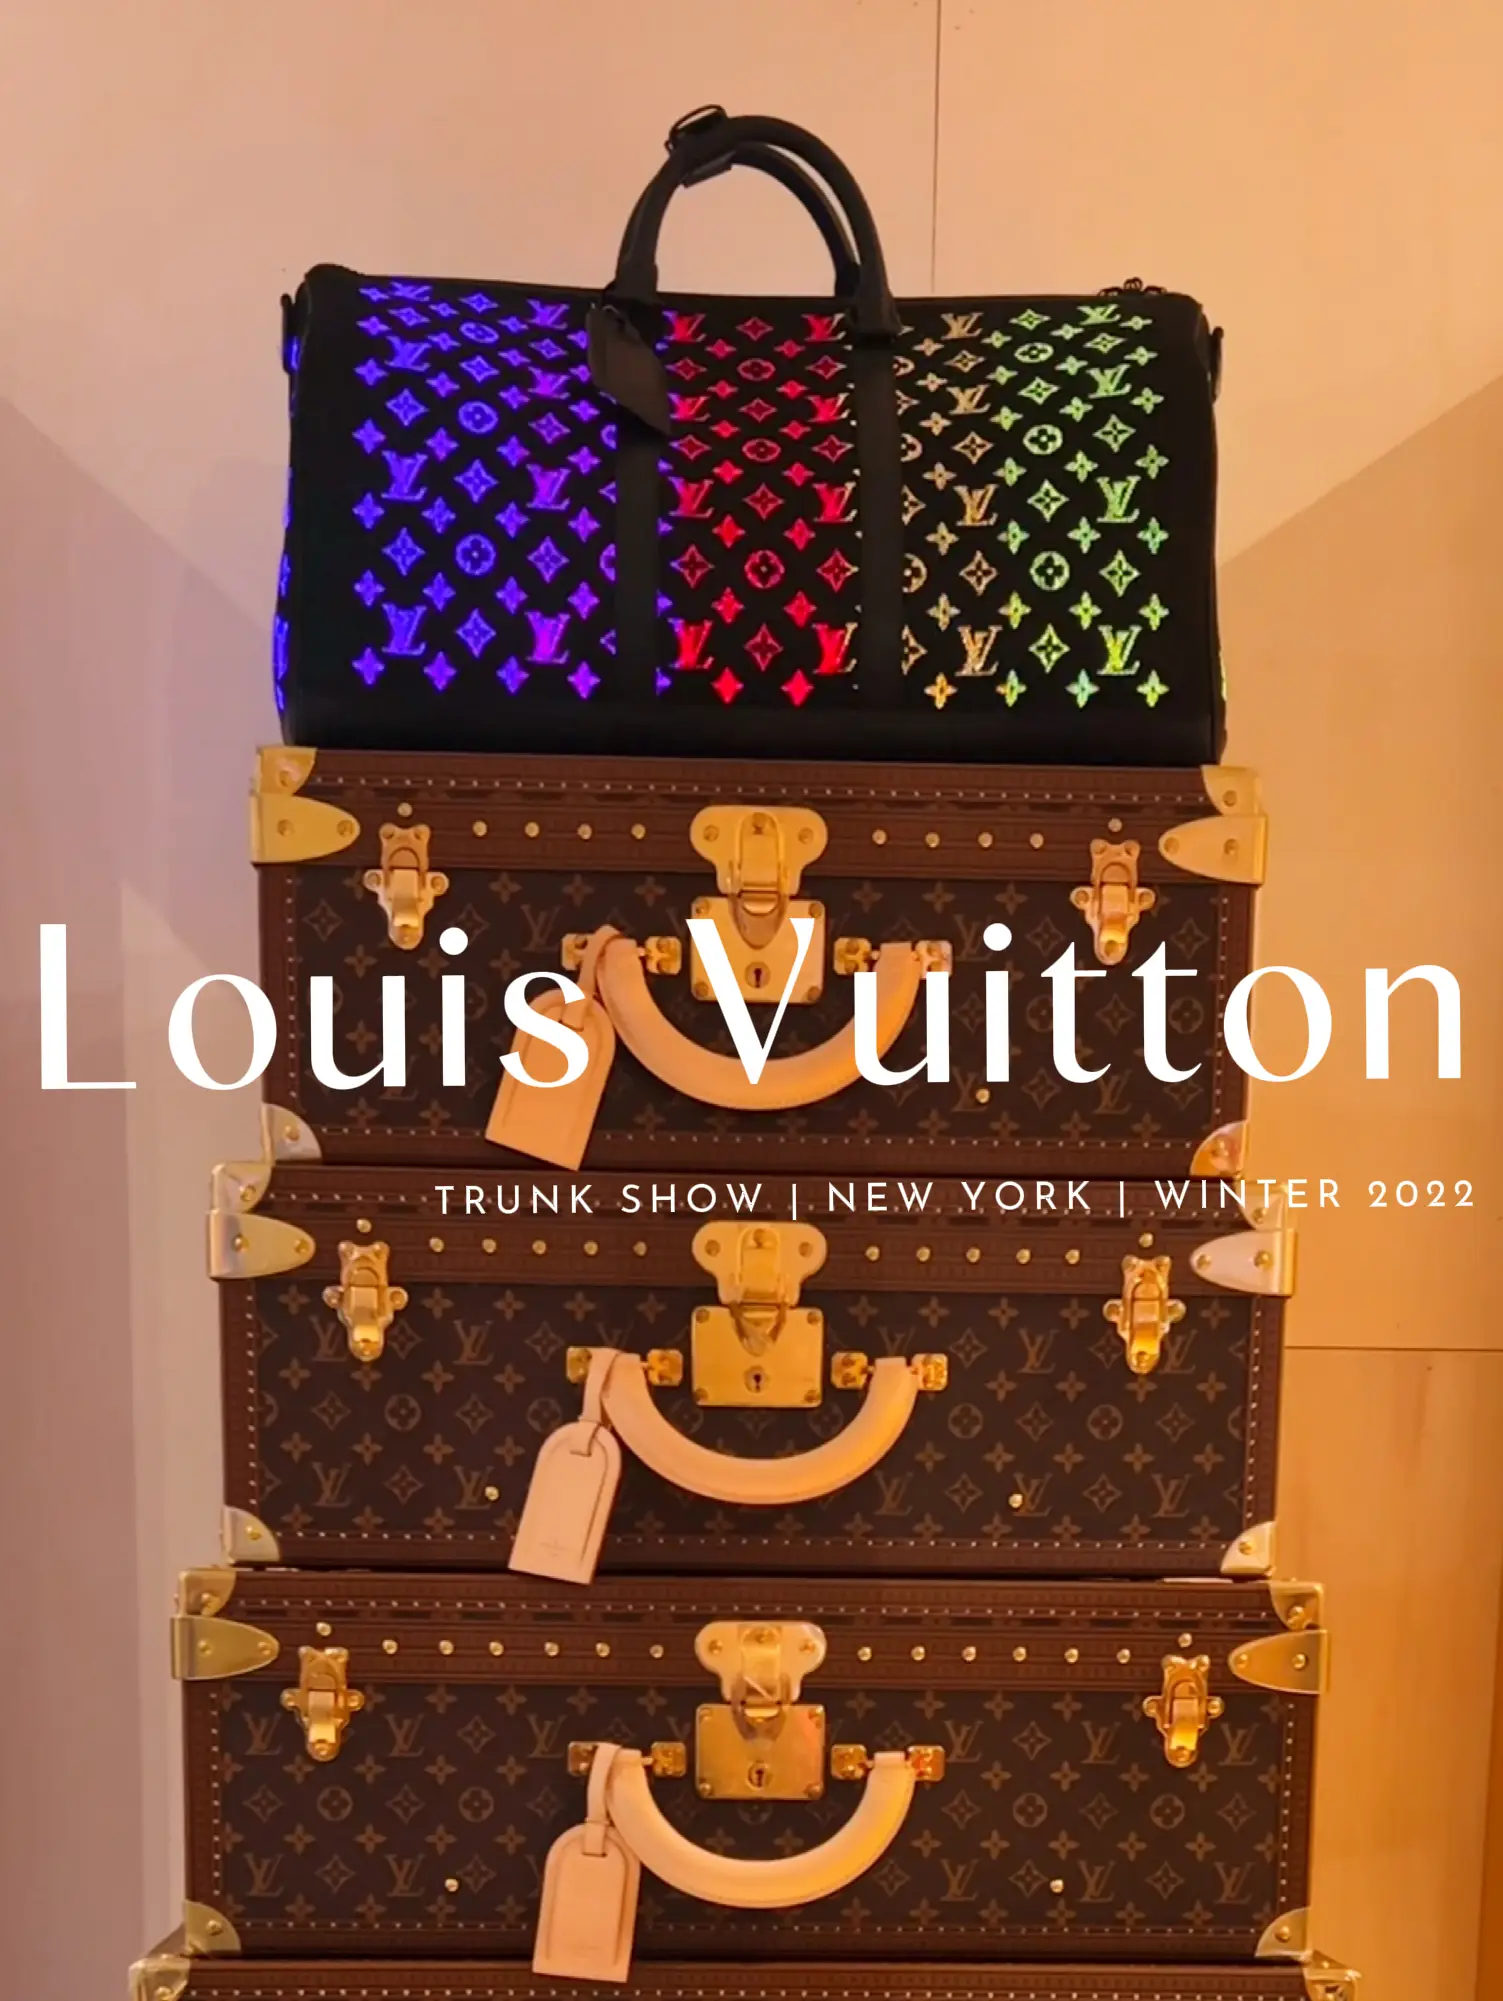 A new showcase in Singapore shows how Louis Vuitton's trunks have